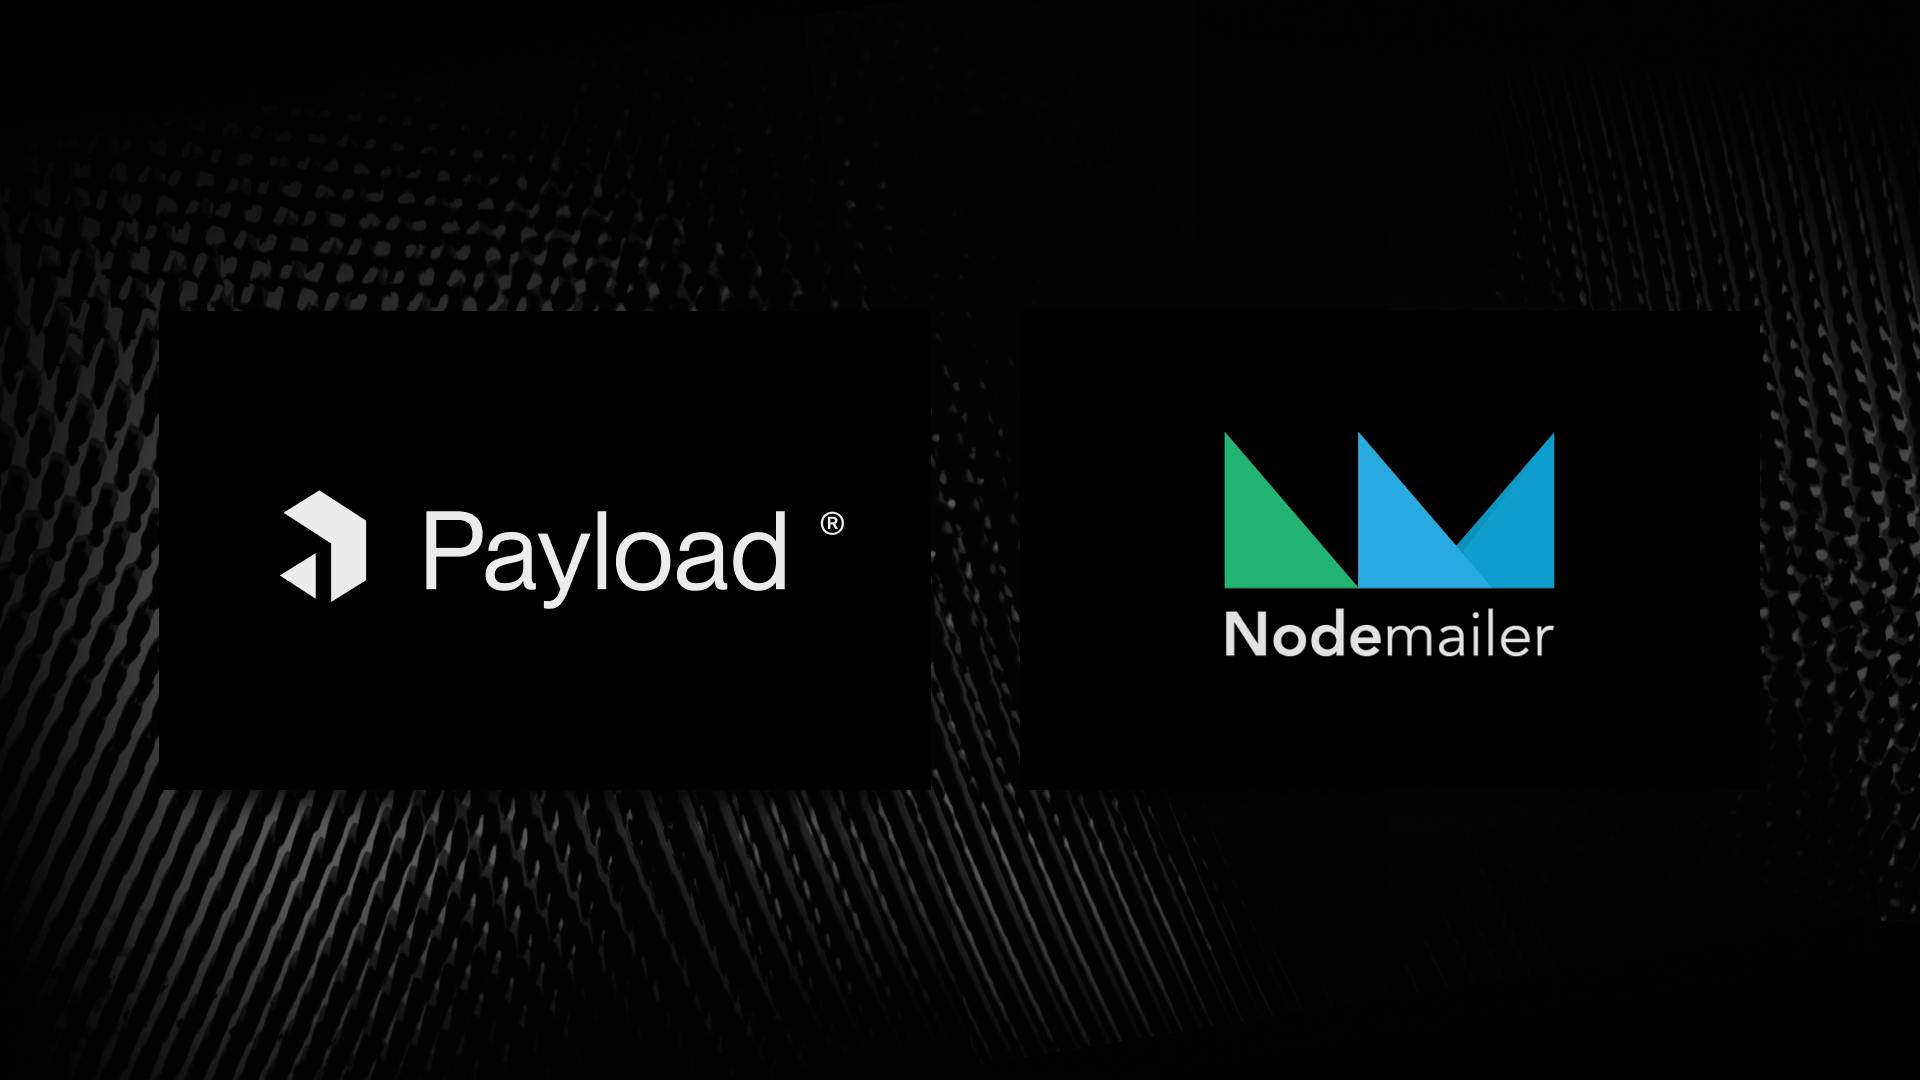 Payload + Nodemailer